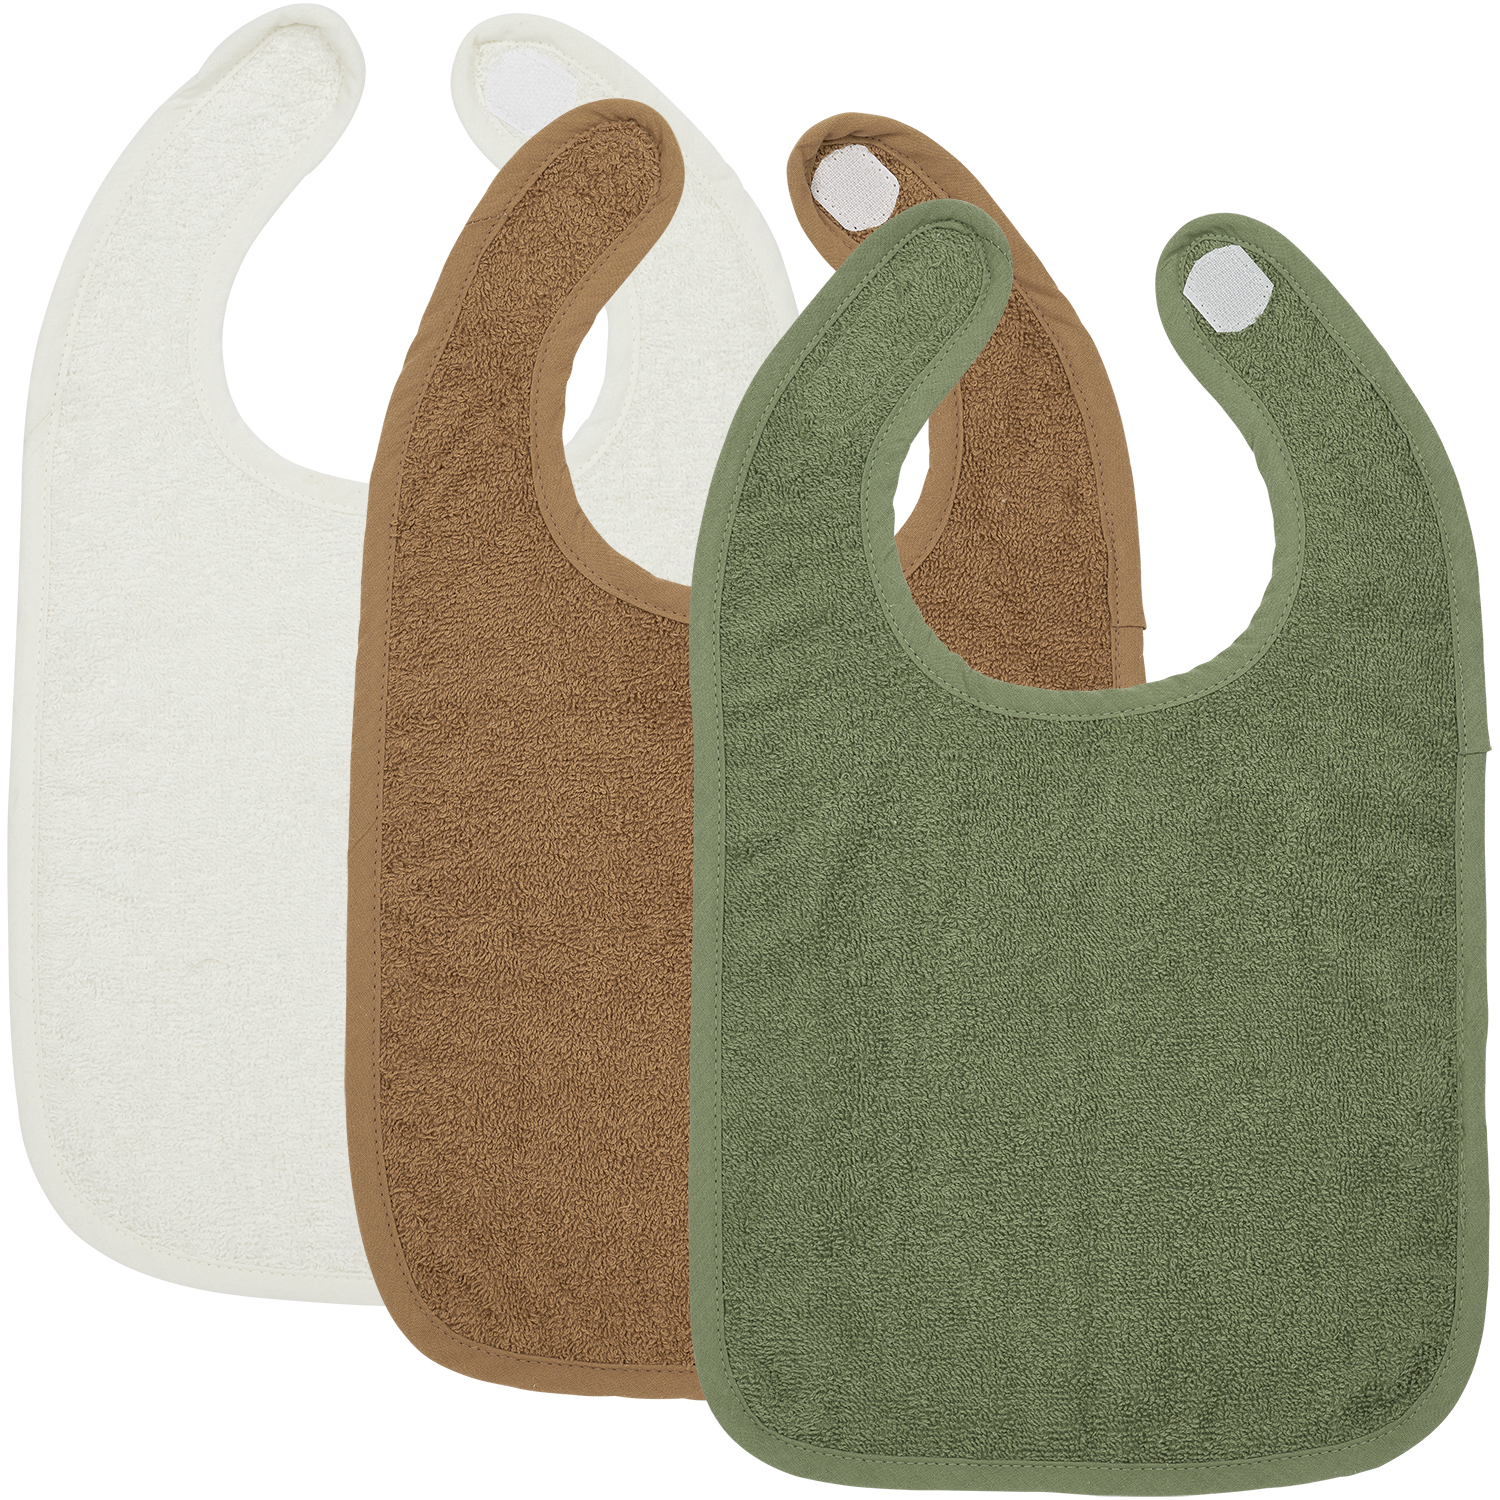 Slab 3-pack badstof Uni - offwhite/toffee/forest green